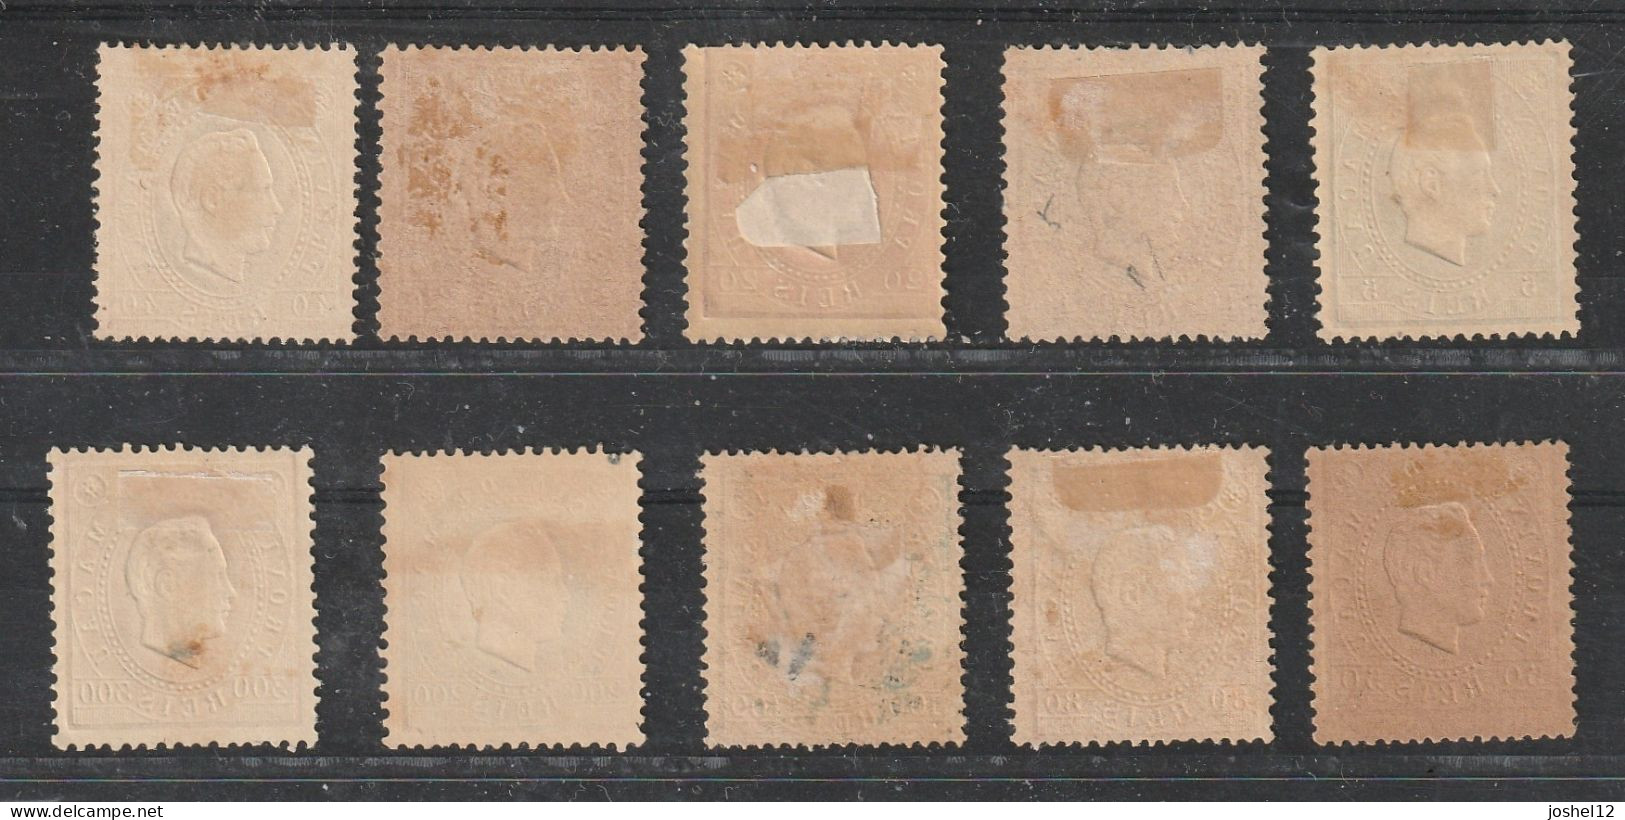 Macau Macao 1887 King Luis Set. MH/No Gum. Mostly Fine - Unused Stamps